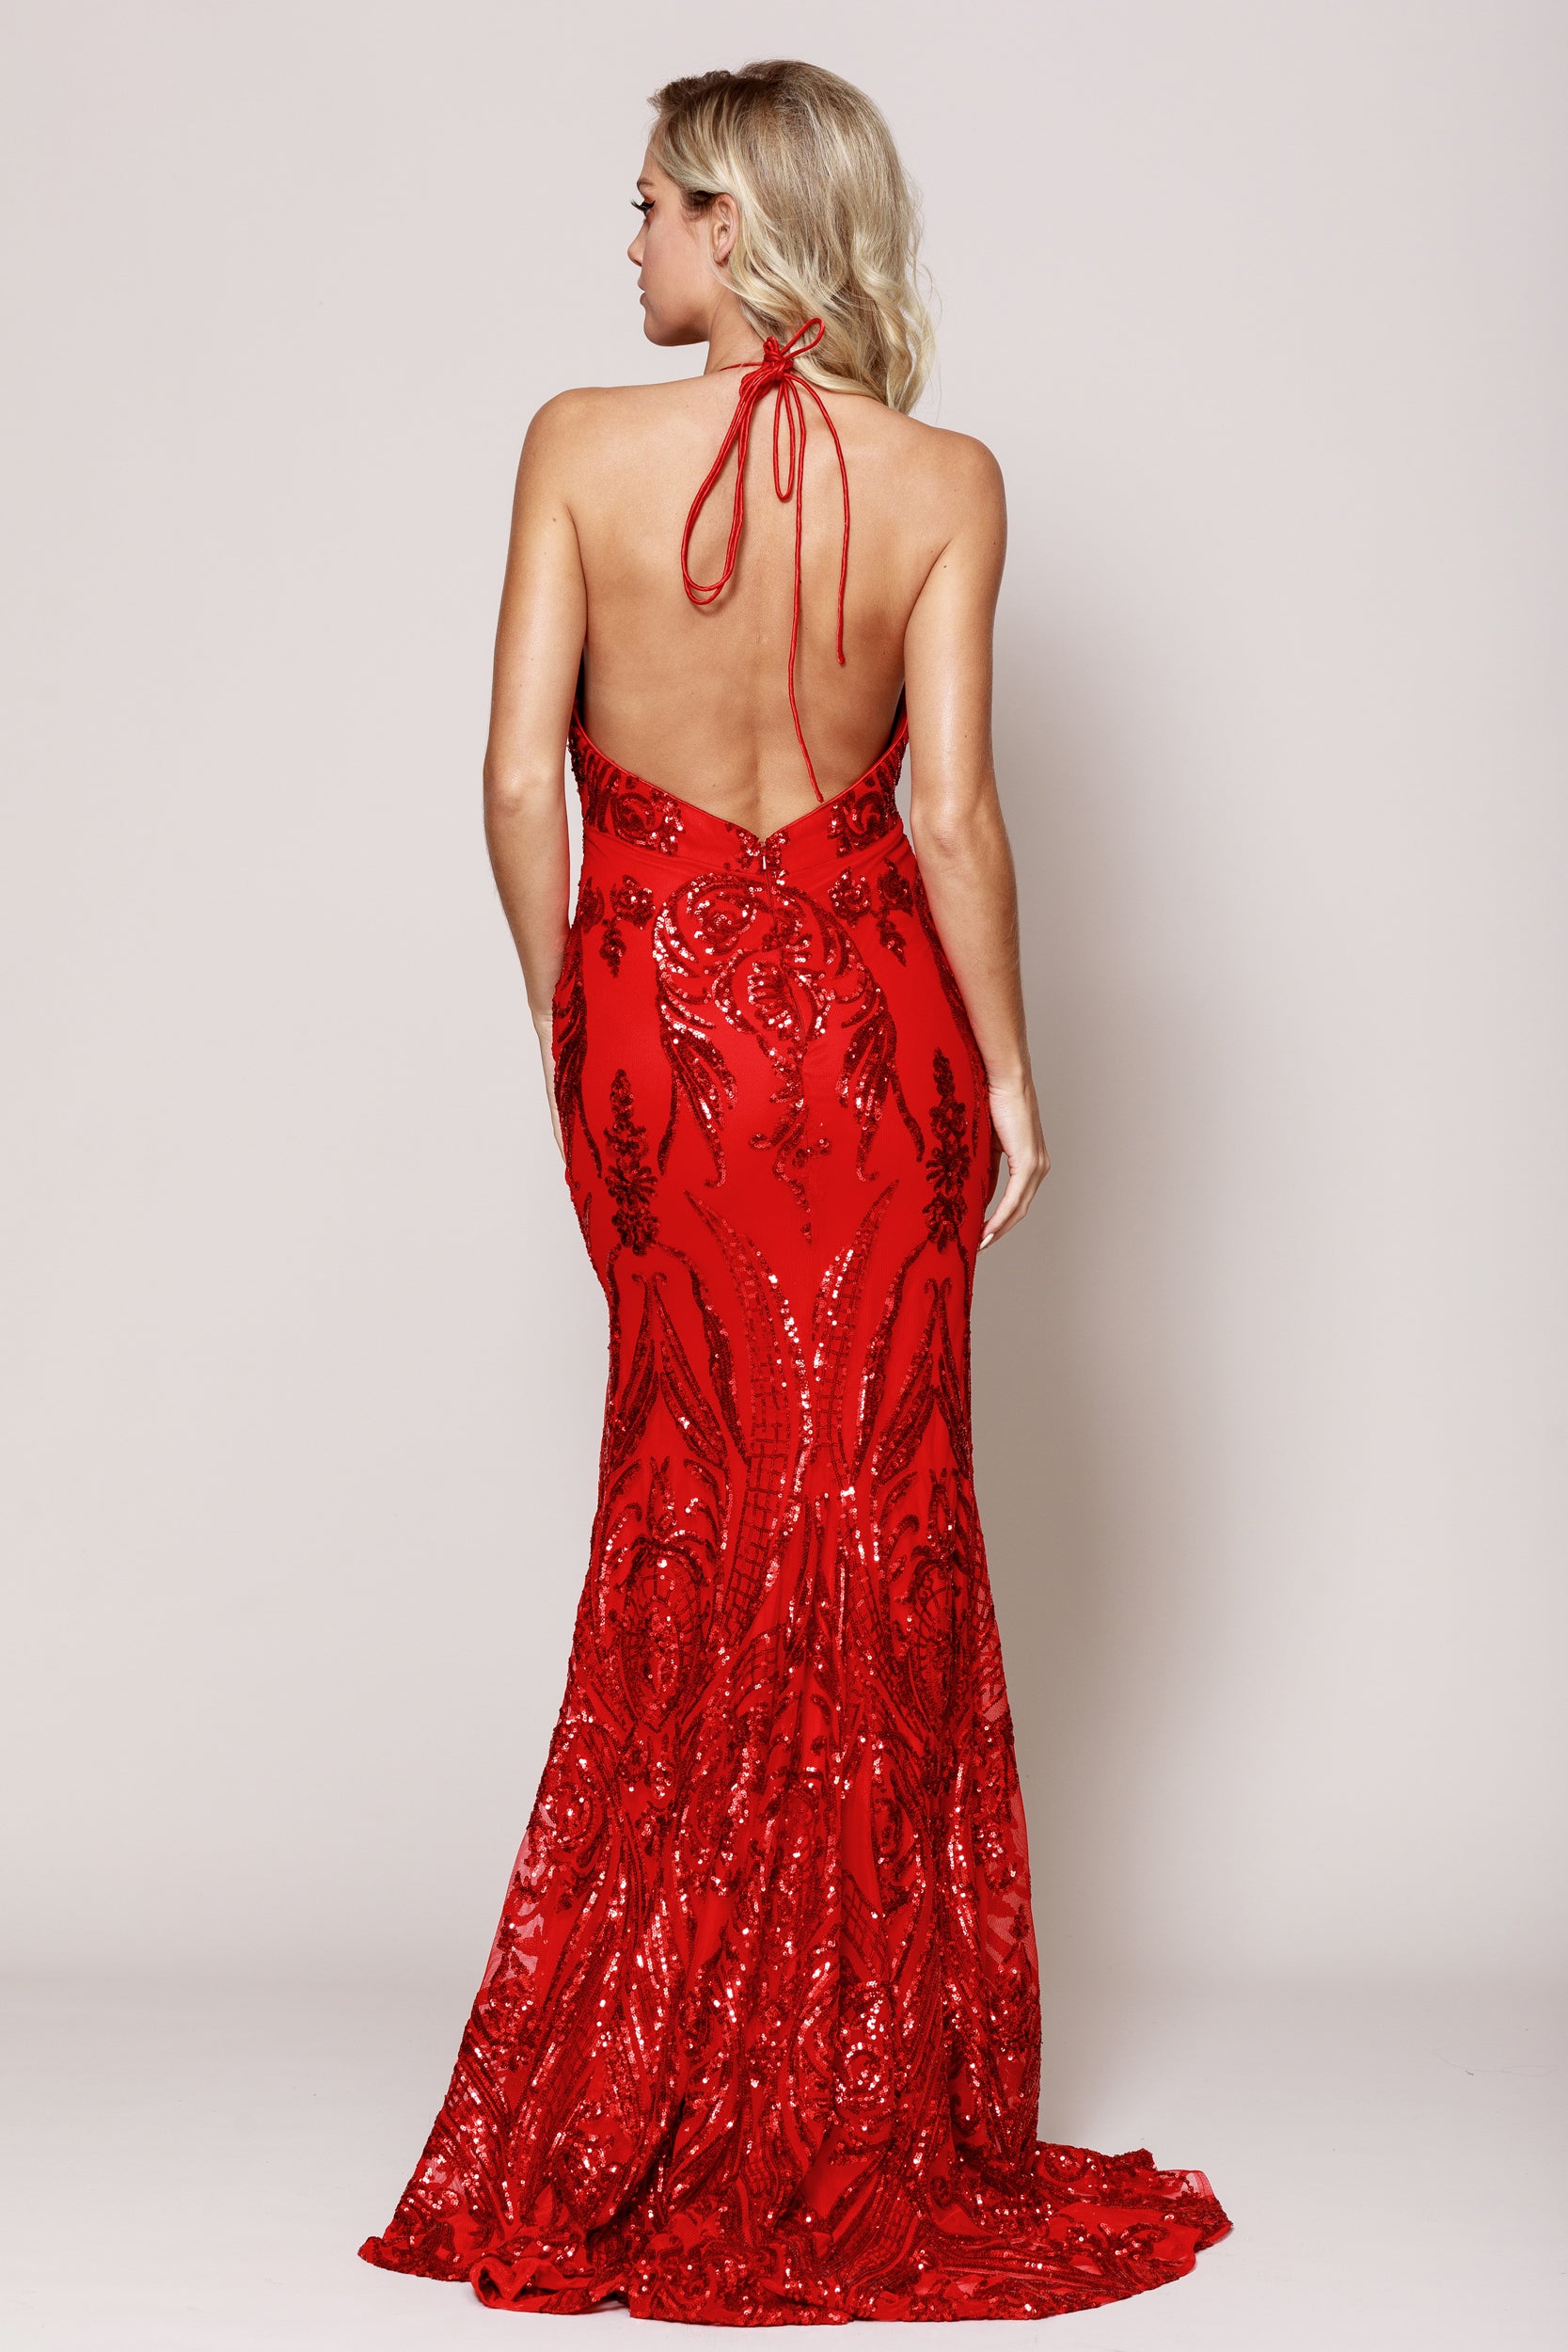 Image of Halter Neck High Slit Prom Gown back in Red